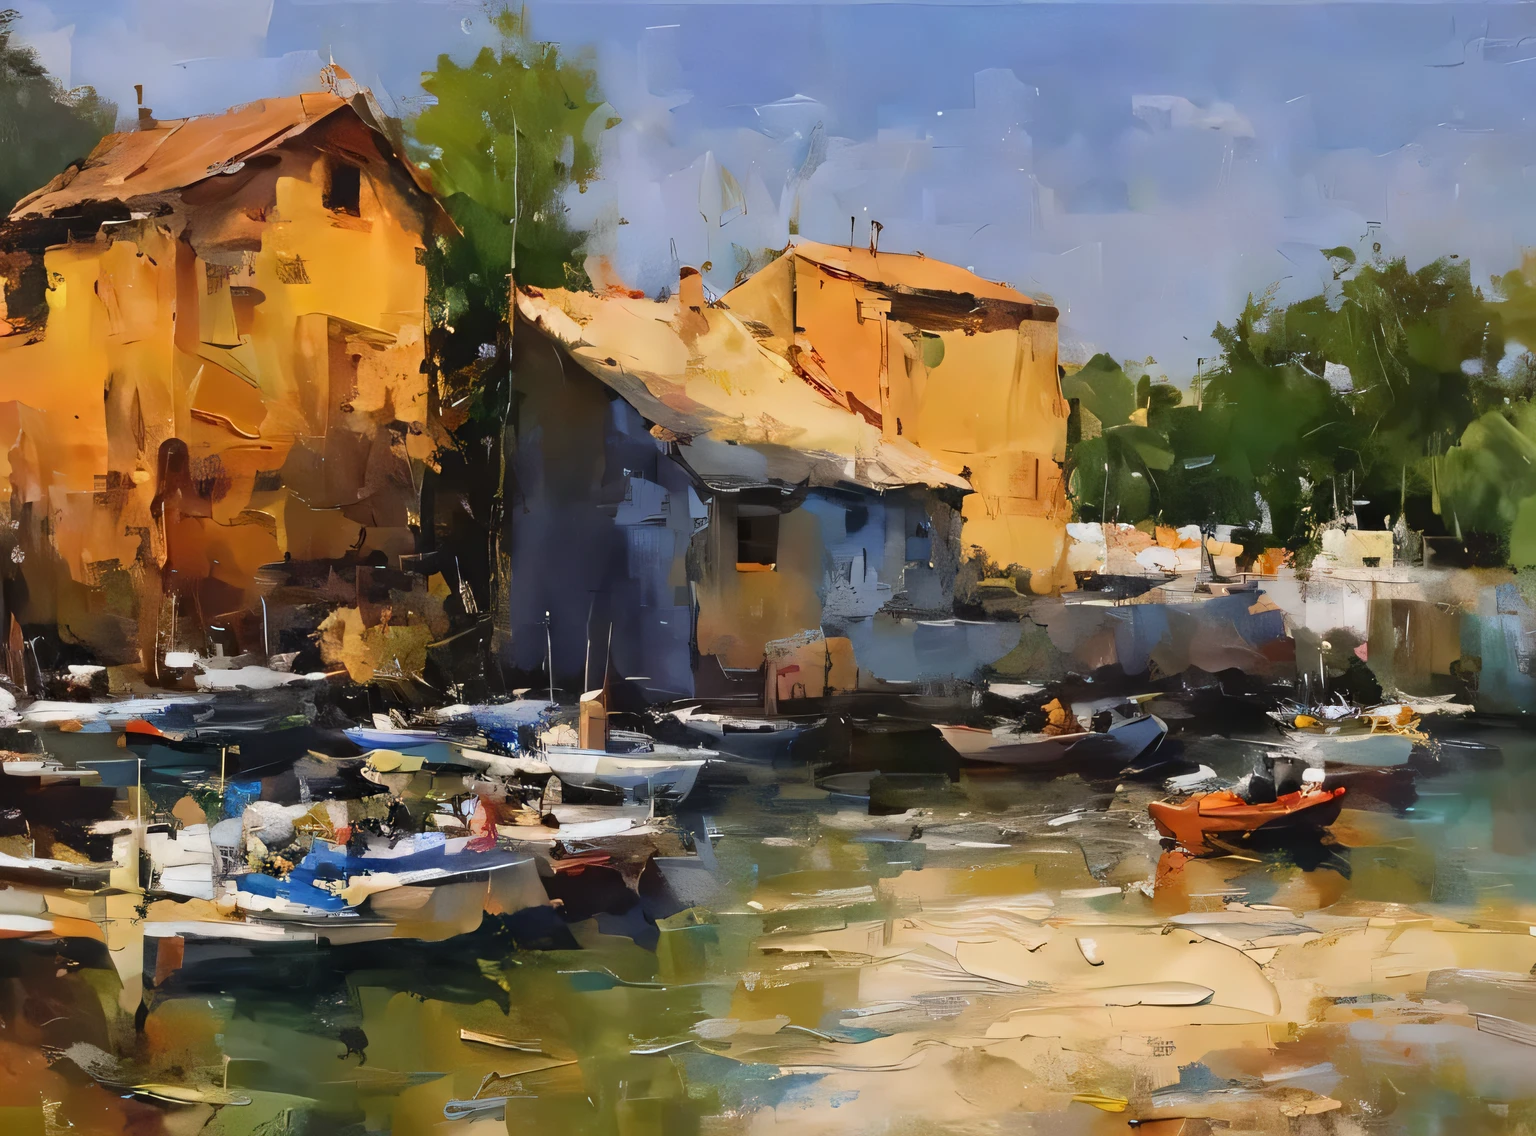 oil painting on canvas, impressionism, some small and poor houses with some boats, south Vietnam landscape